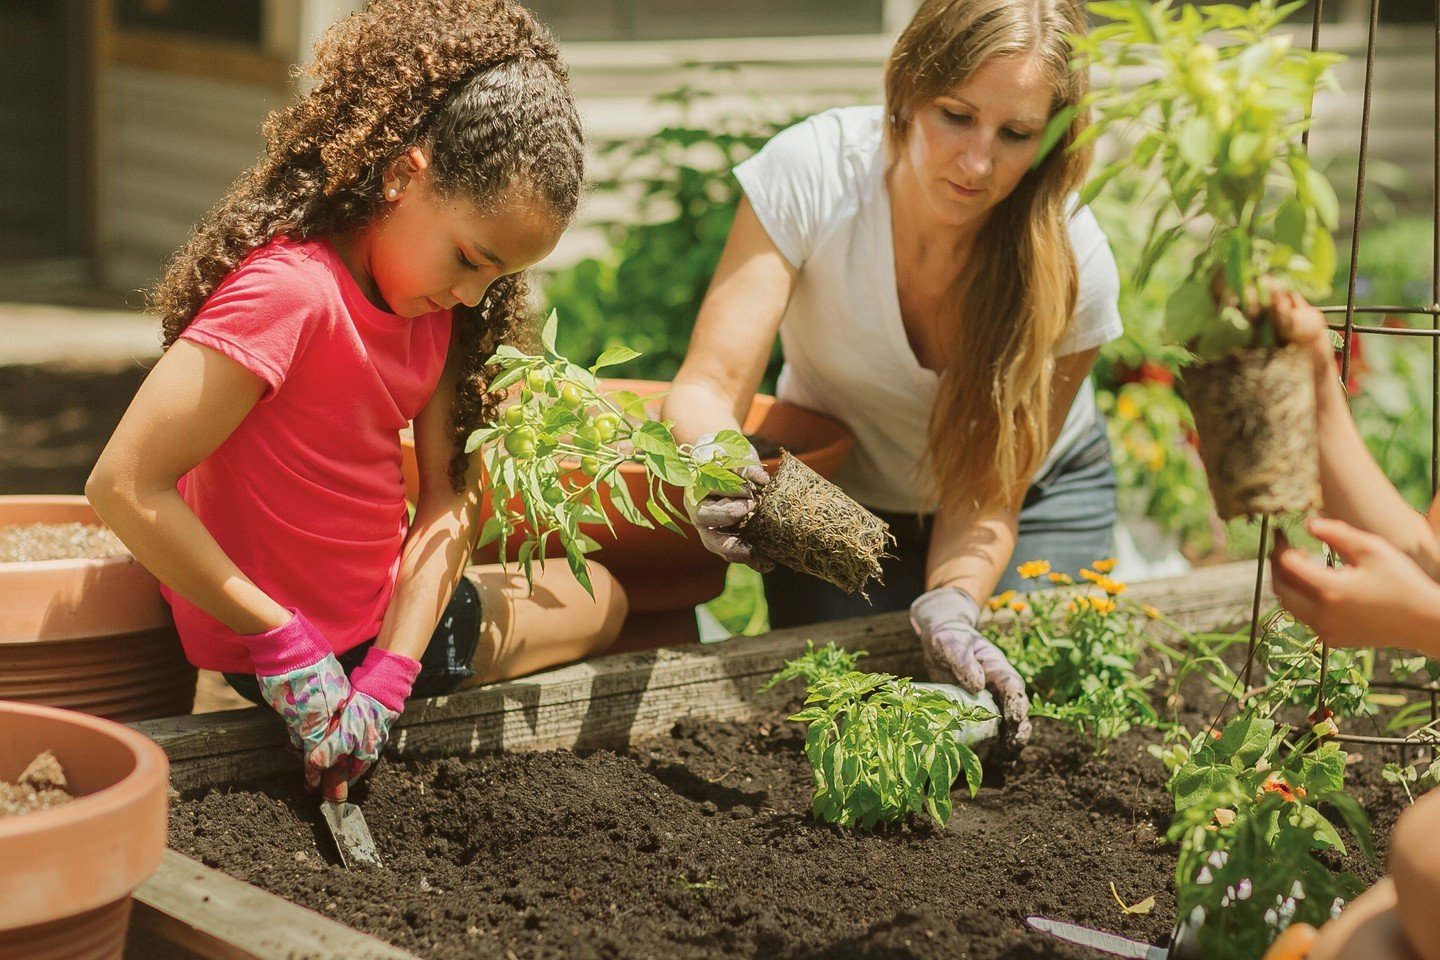 Happy #NationalGardeningDay! We appreciate each and every one of you and are excited to garden with you again this season. Share your stories or pictures with us on how you are celebrating today?